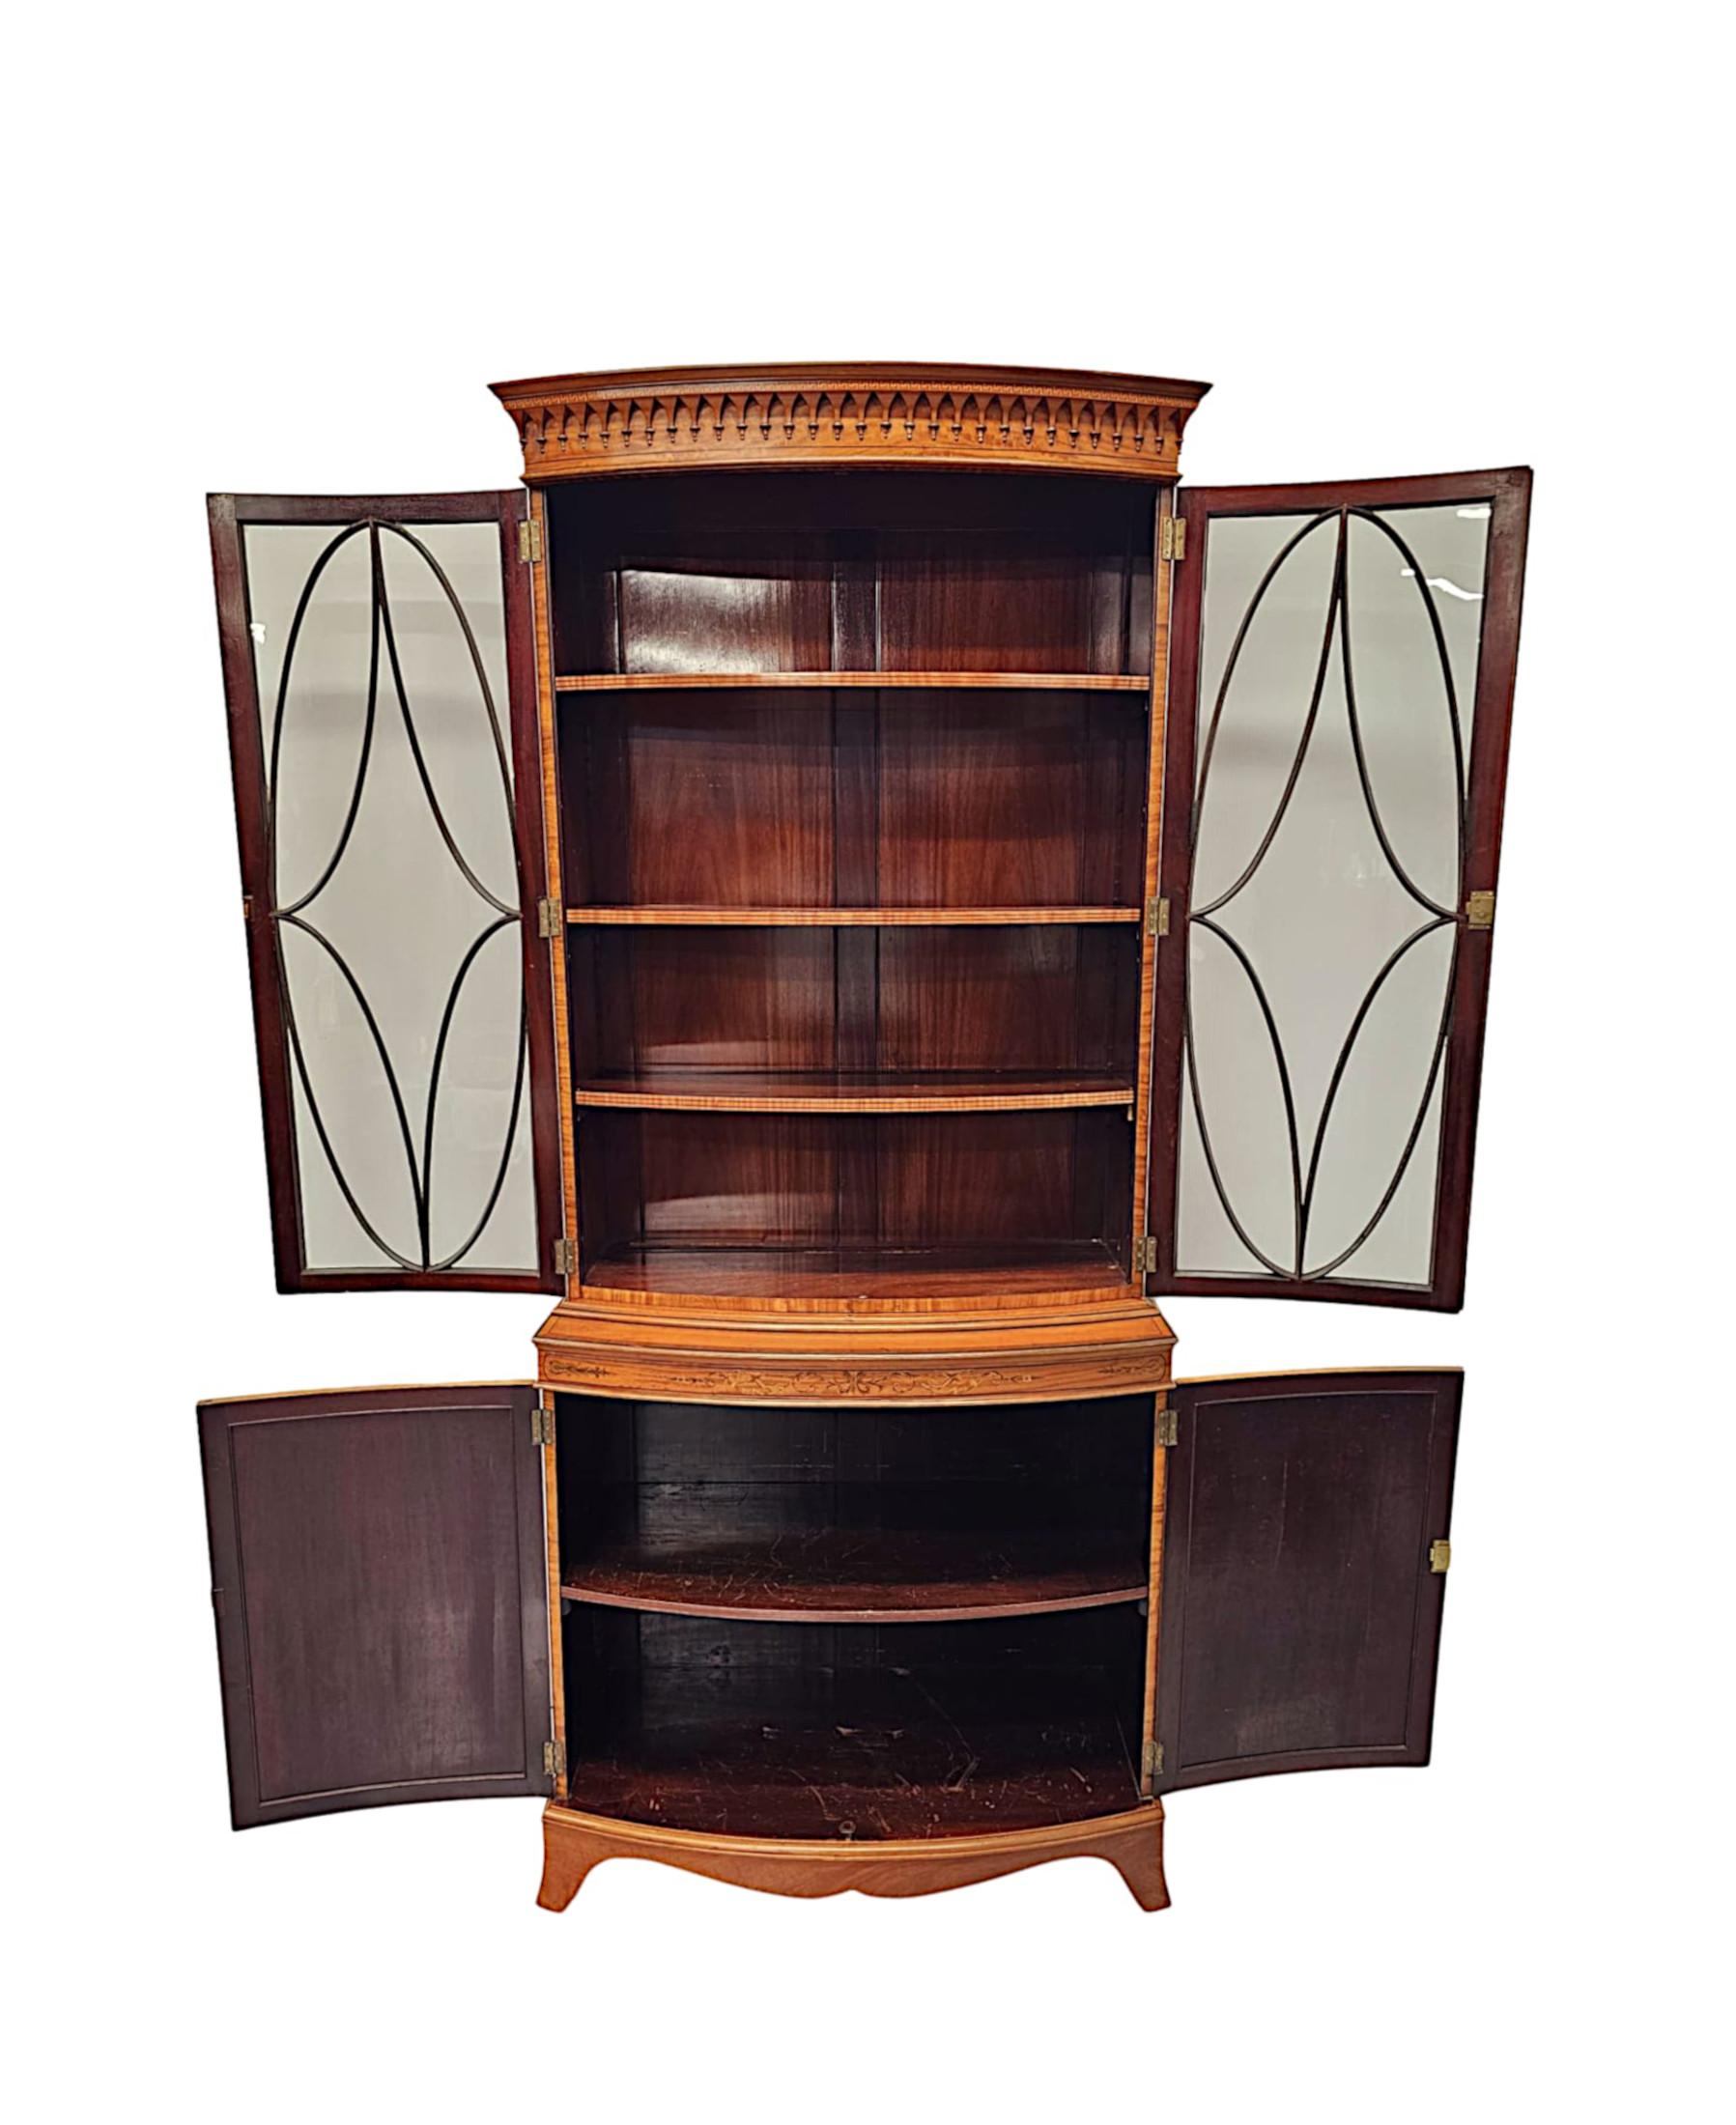 A  Fine Edwardian Marquetry Inlaid Bowfronted Bookcase afterf Edward and Roberts In Good Condition For Sale In Dublin, IE